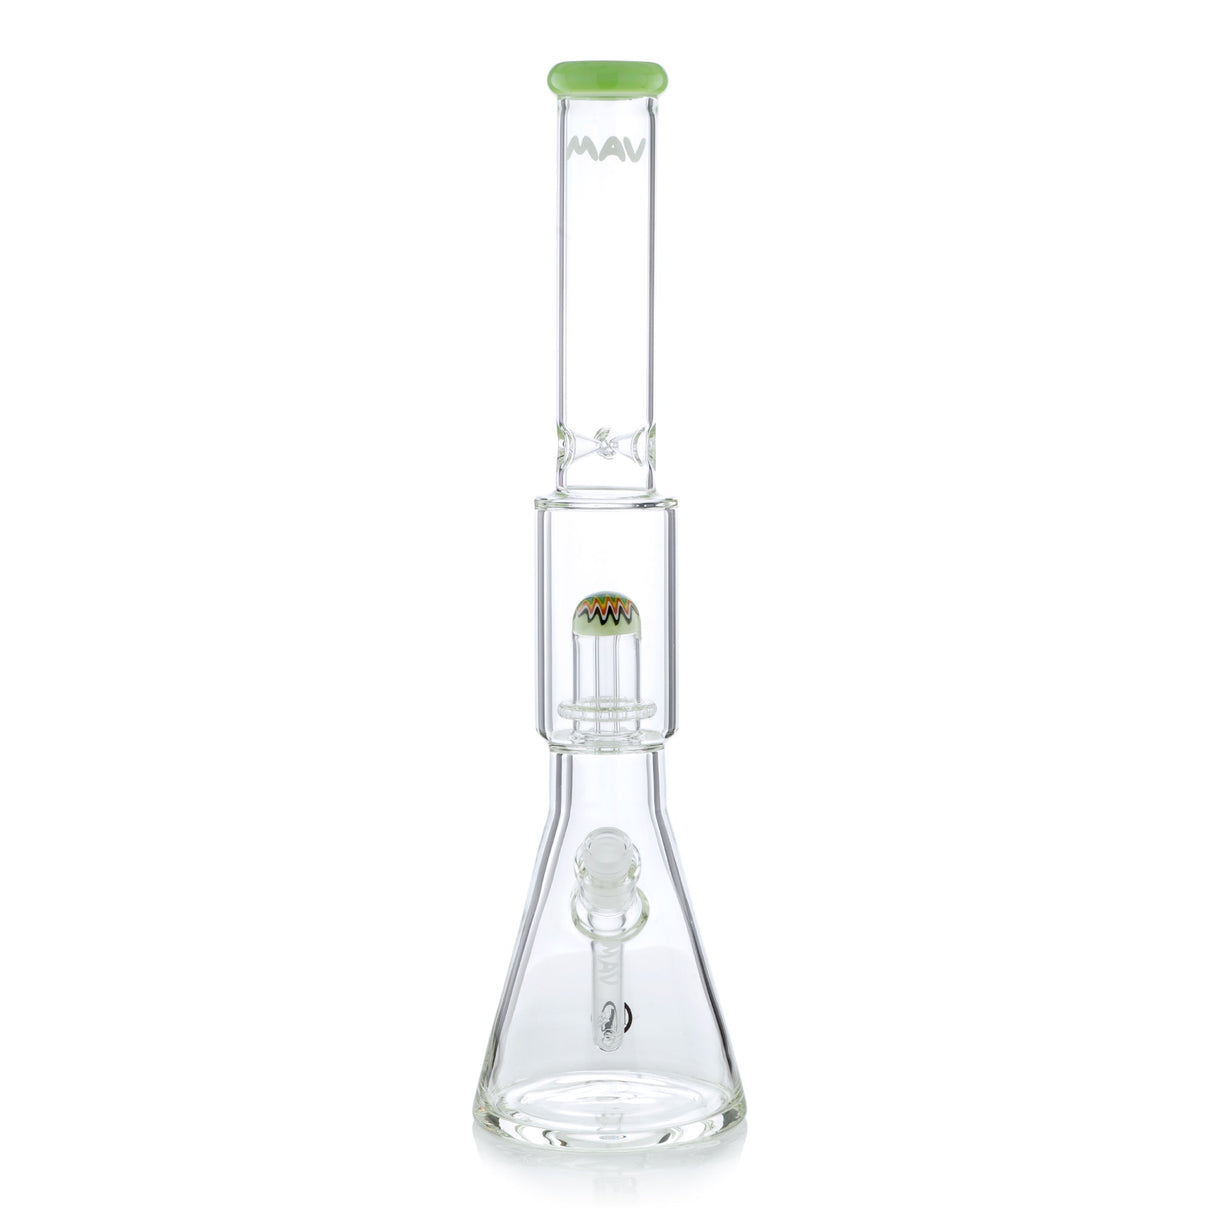 MAV Glass 19" Wig Wag Reversal UFO Beaker Bong with Clear Glass and Green Accents - Front View